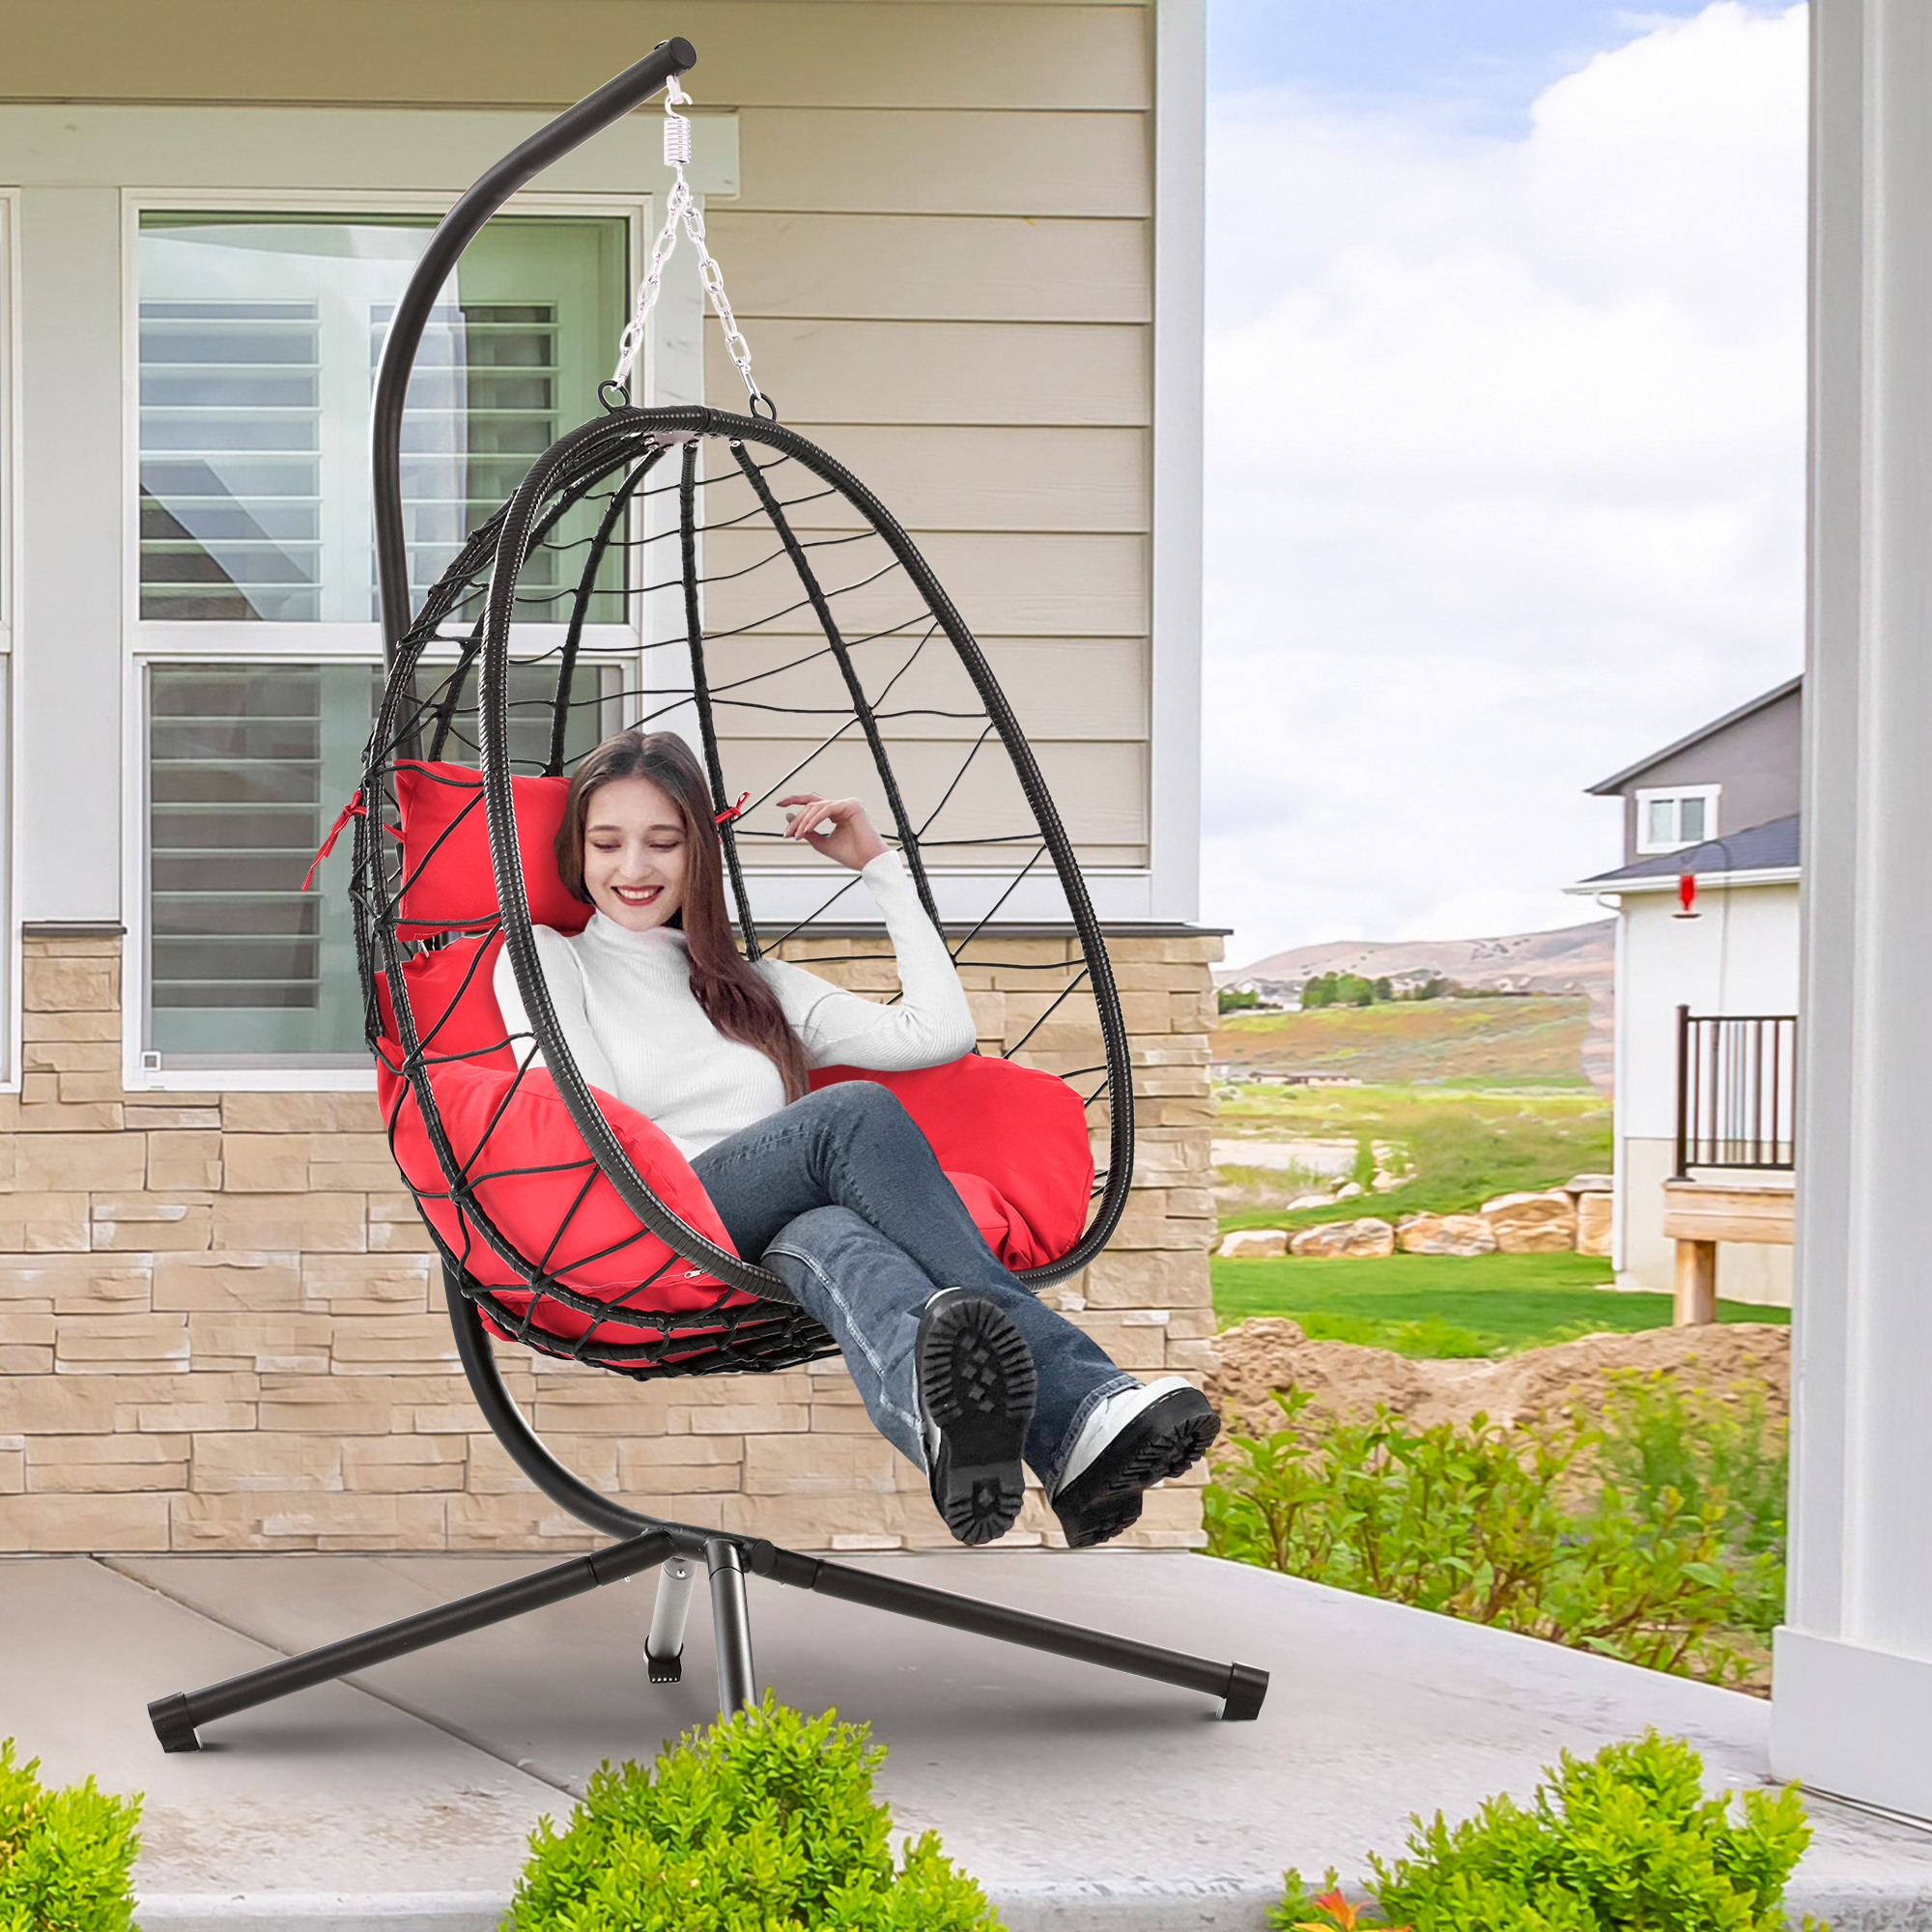 Swing Egg Chair, Outdoor Hanging Egg Chair with Stand, Wicker Swing Chair w/ Seat and Back Cushion, All-Weather UV Rattan Lounge Chair for Livingroom, Patio, Deck, Yard, Garden, 350lbs, Red, SS1954 - image 2 of 9